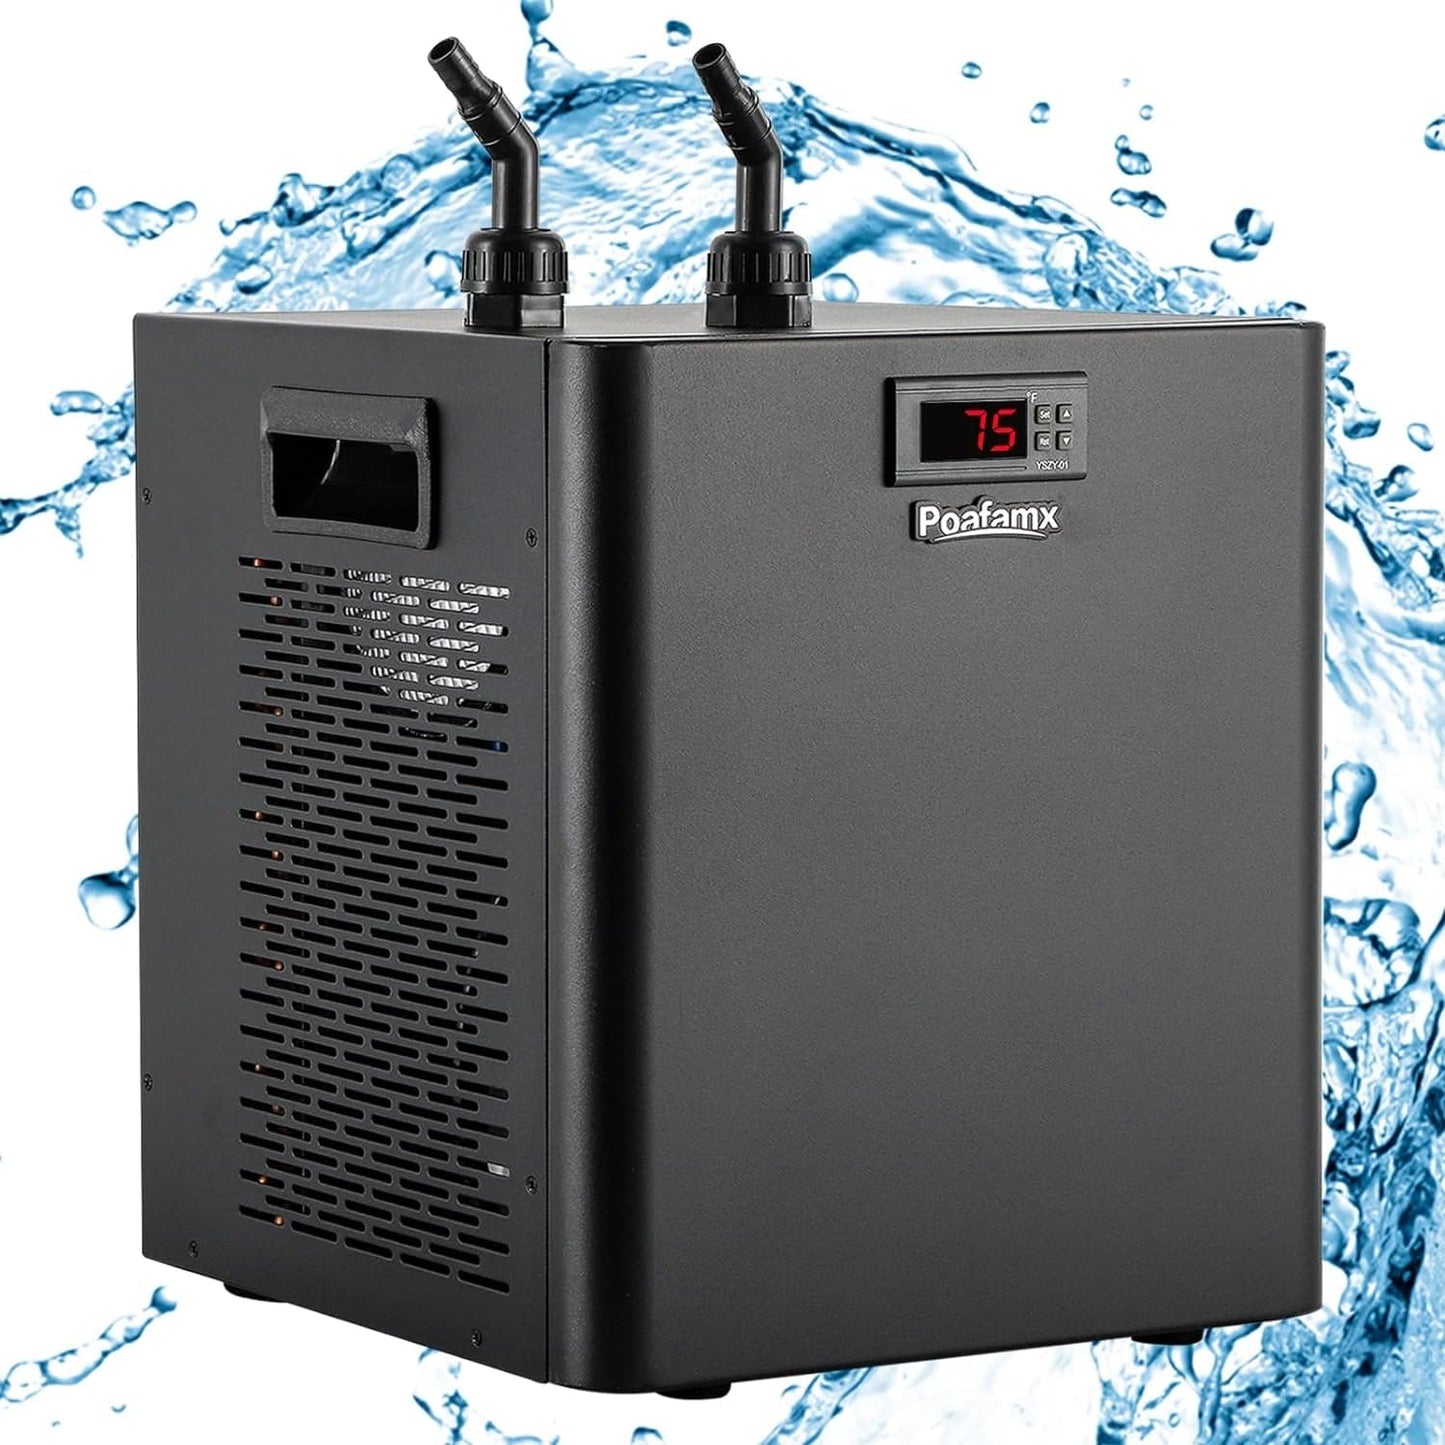 Aquarium Chiller 79Gal 1/3 HP Water Chiller for Hydroponics System Home Use Axolotl Fish Coral Shrimp 110V with Pump and Pipe Black